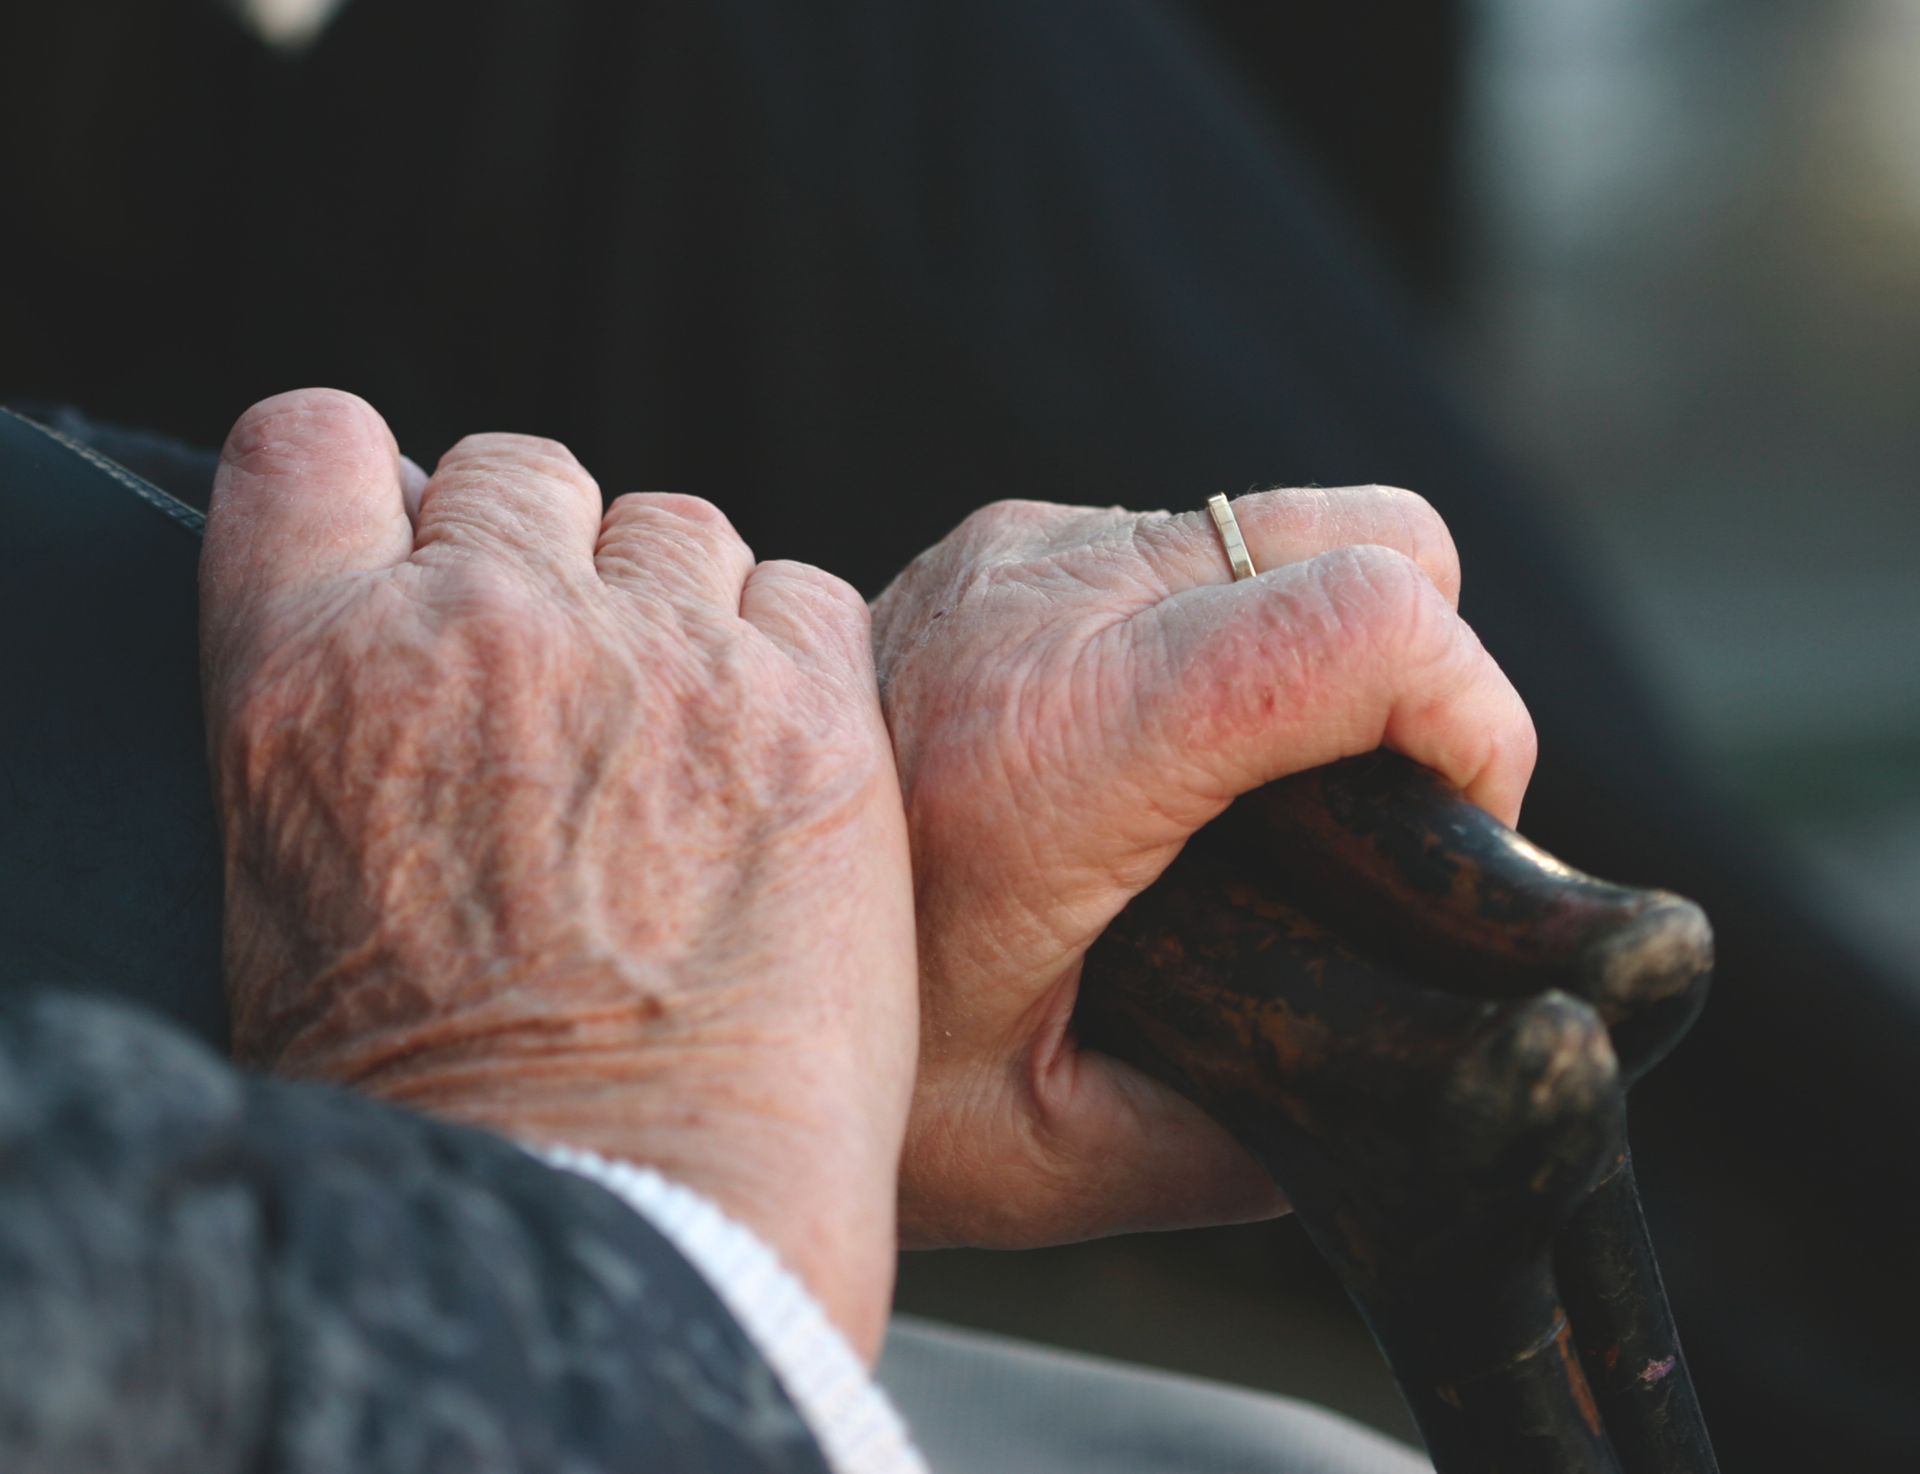 Two hand of elderly person holding a stick.